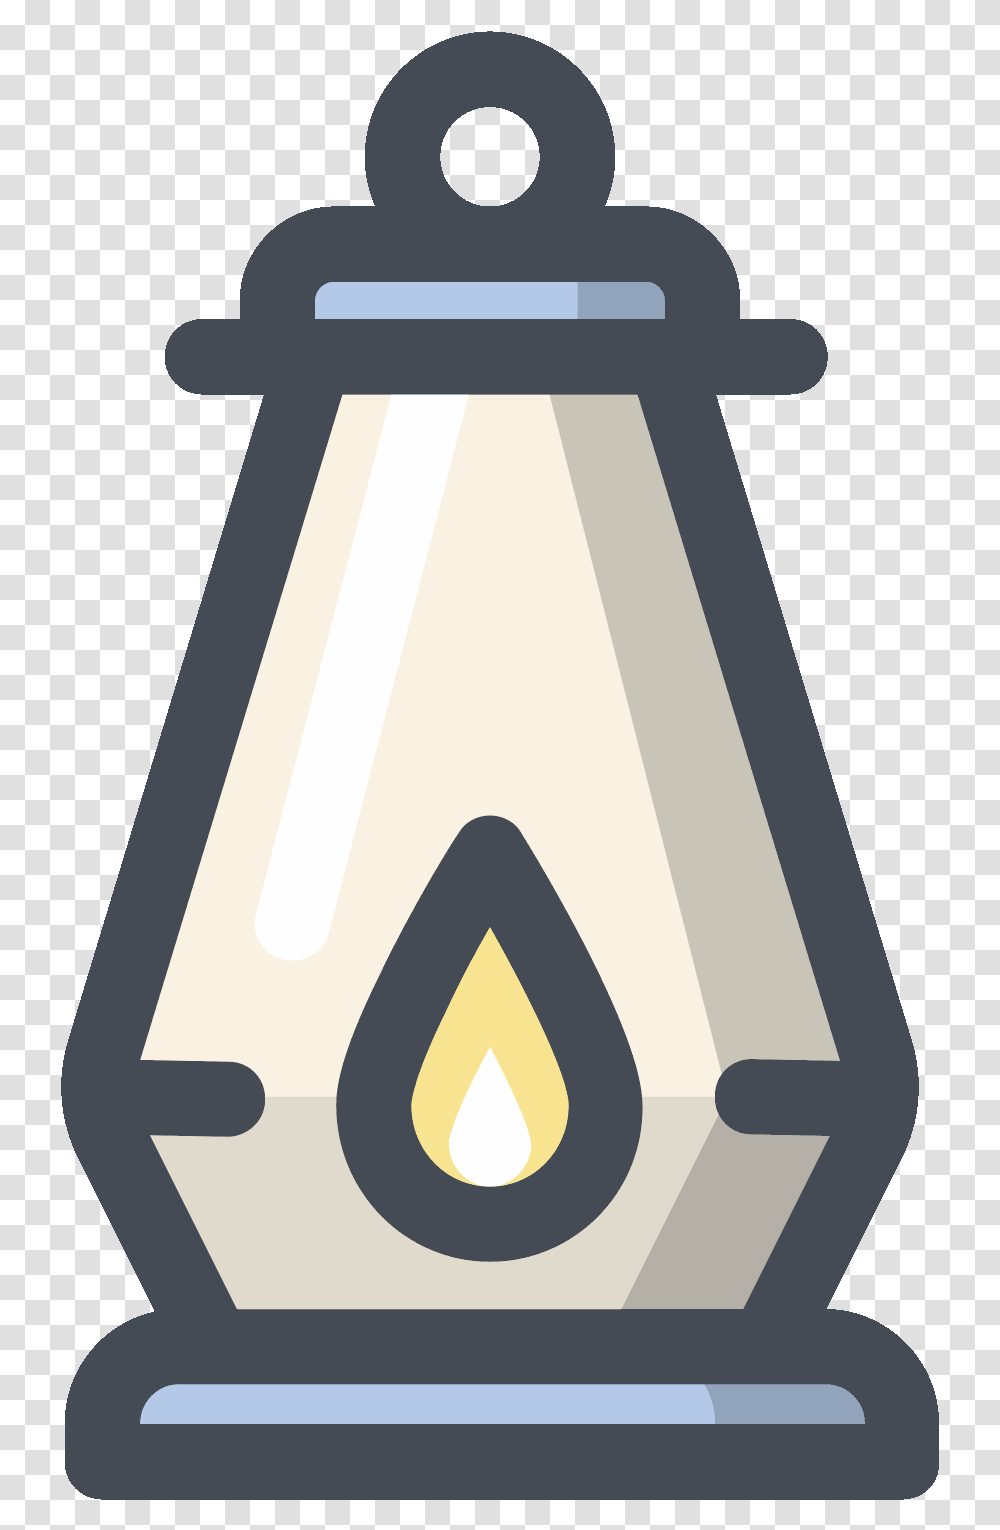 Oil Lamp Icon Download Lampara Icon, Cross, Bottle, Rug Transparent Png